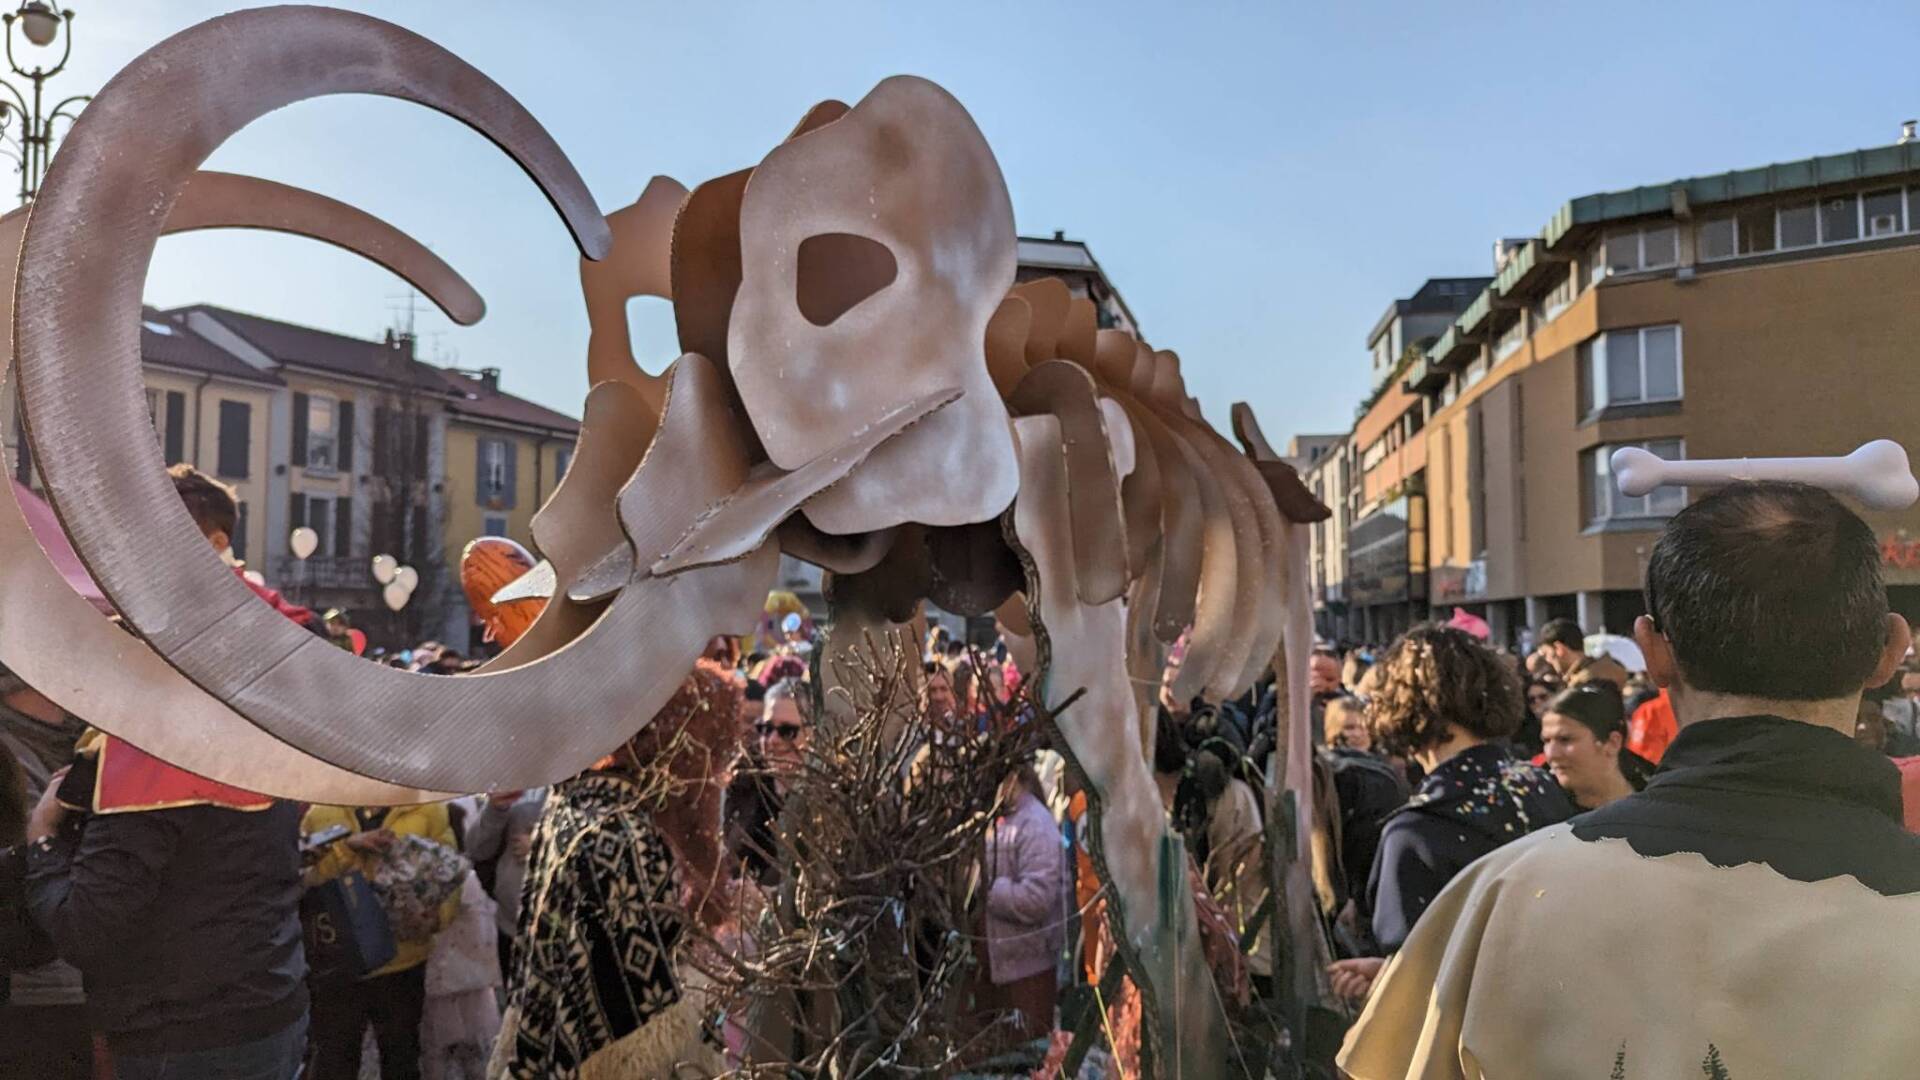 Carnival in Saronno, “Beautiful dinosaurs and little cavemen but… where are the floats?”